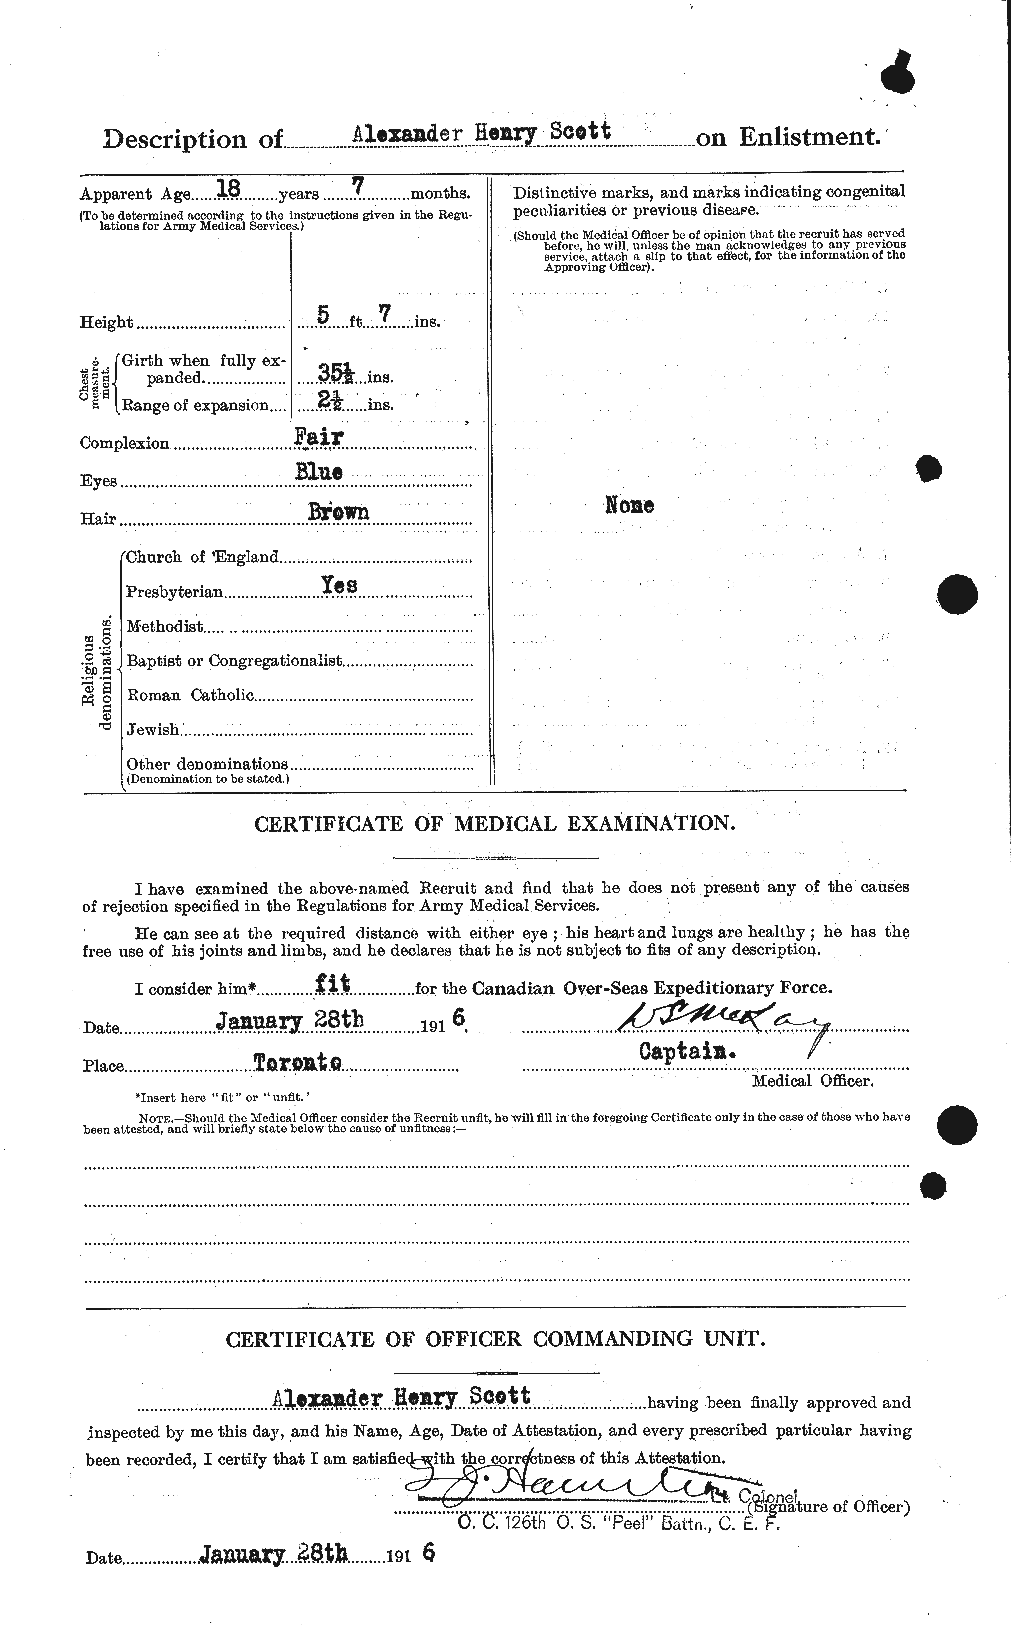 Personnel Records of the First World War - CEF 086596b